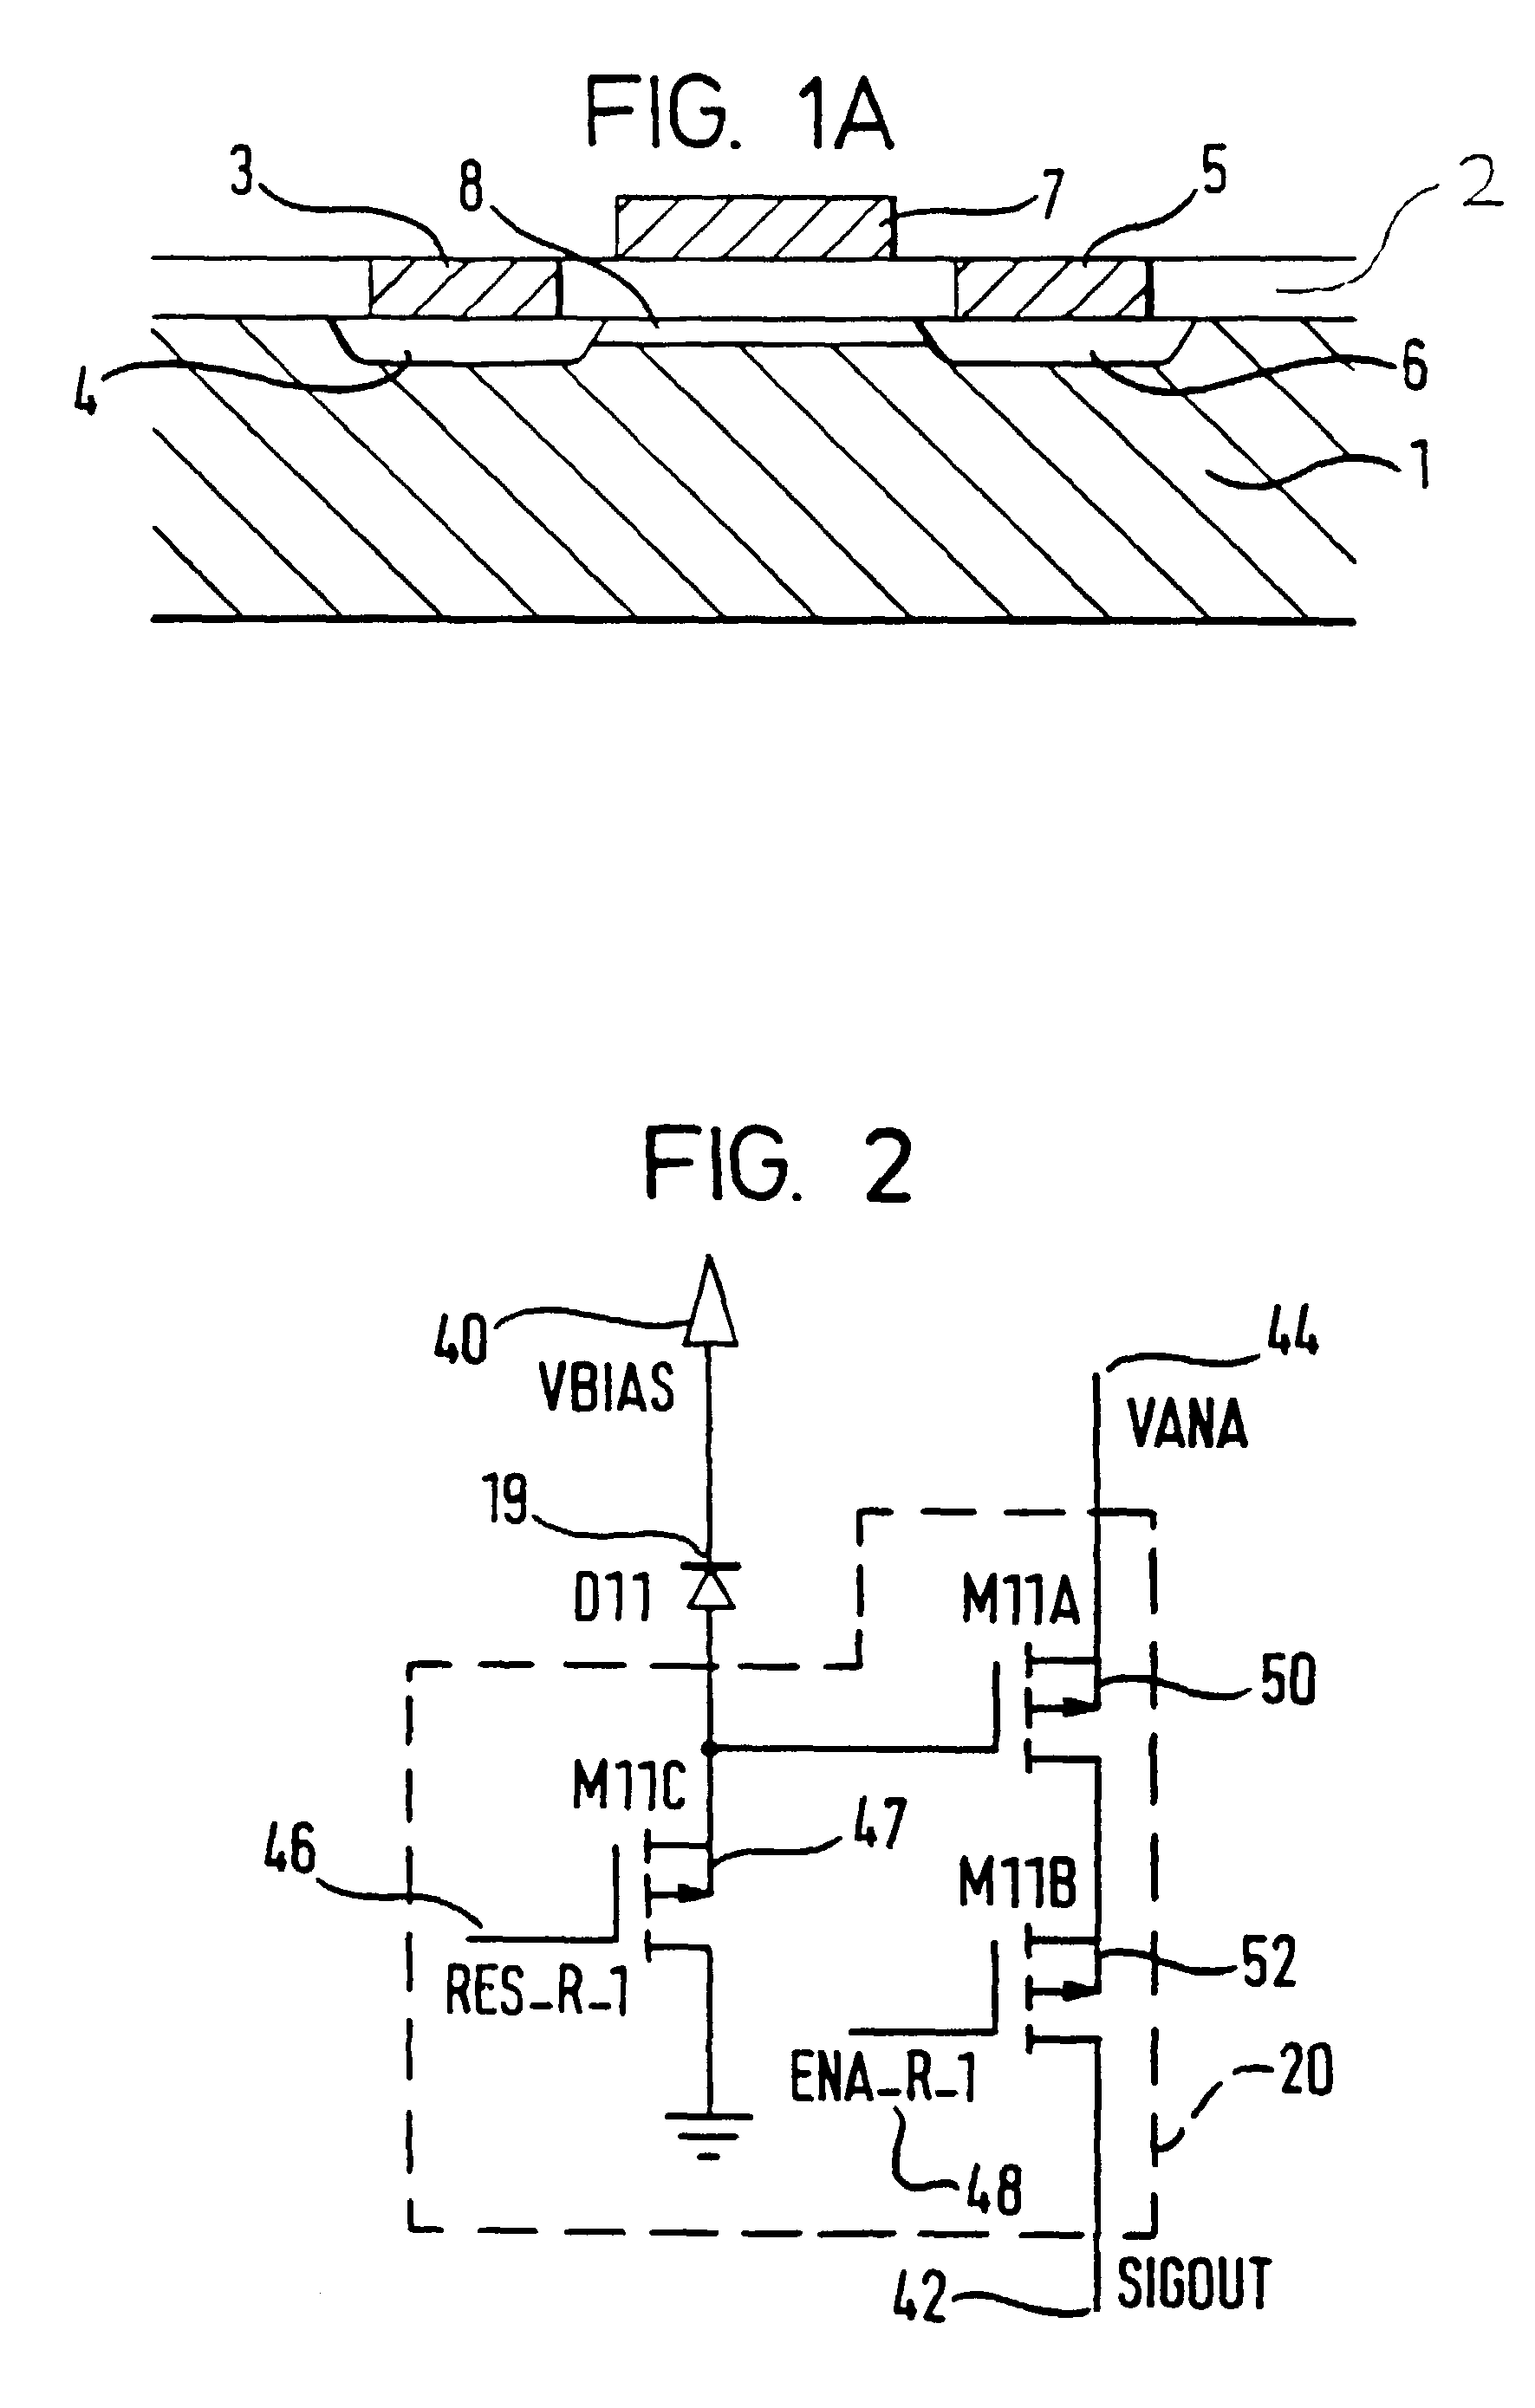 Imaging devices, systems and methods